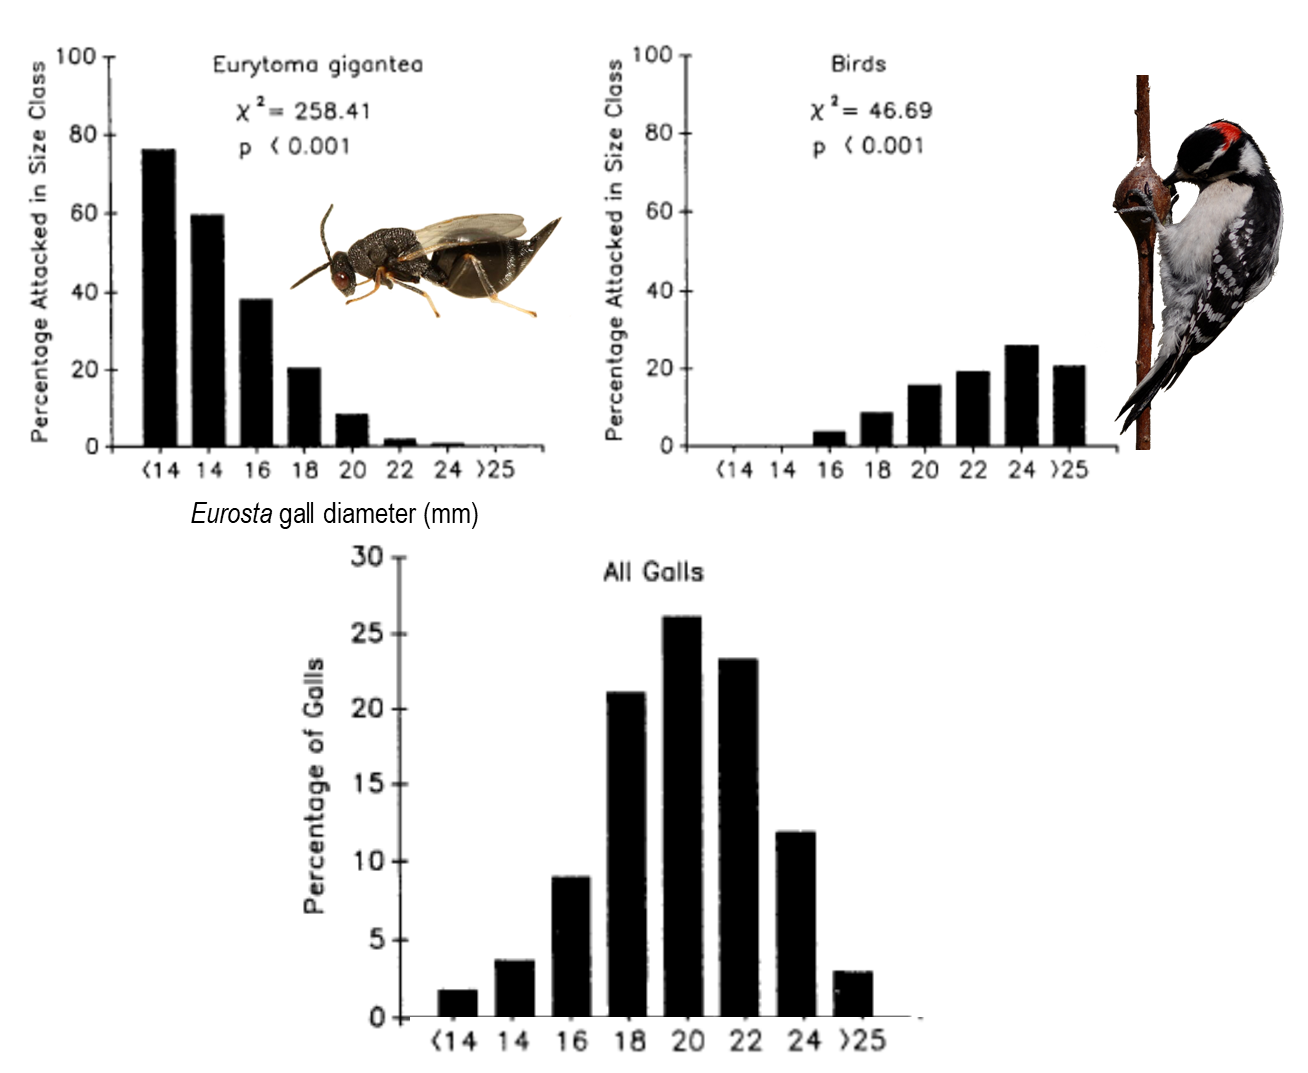 <p>The figures below depict the results of a classic study on the effects of predators (birds) and parasitoids (Eurytoma gigantea) on goldenrod ball gall size. Because gall size and the feeding rate of the gall-inducing fruit fly larva (Eurosta solidaginis) are positively correlated, these results suggest that natural selection favors ___________feeding rates when Eurytoma and gall fly eating birds are present. a. fast b. slow c. moderate d. all</p>